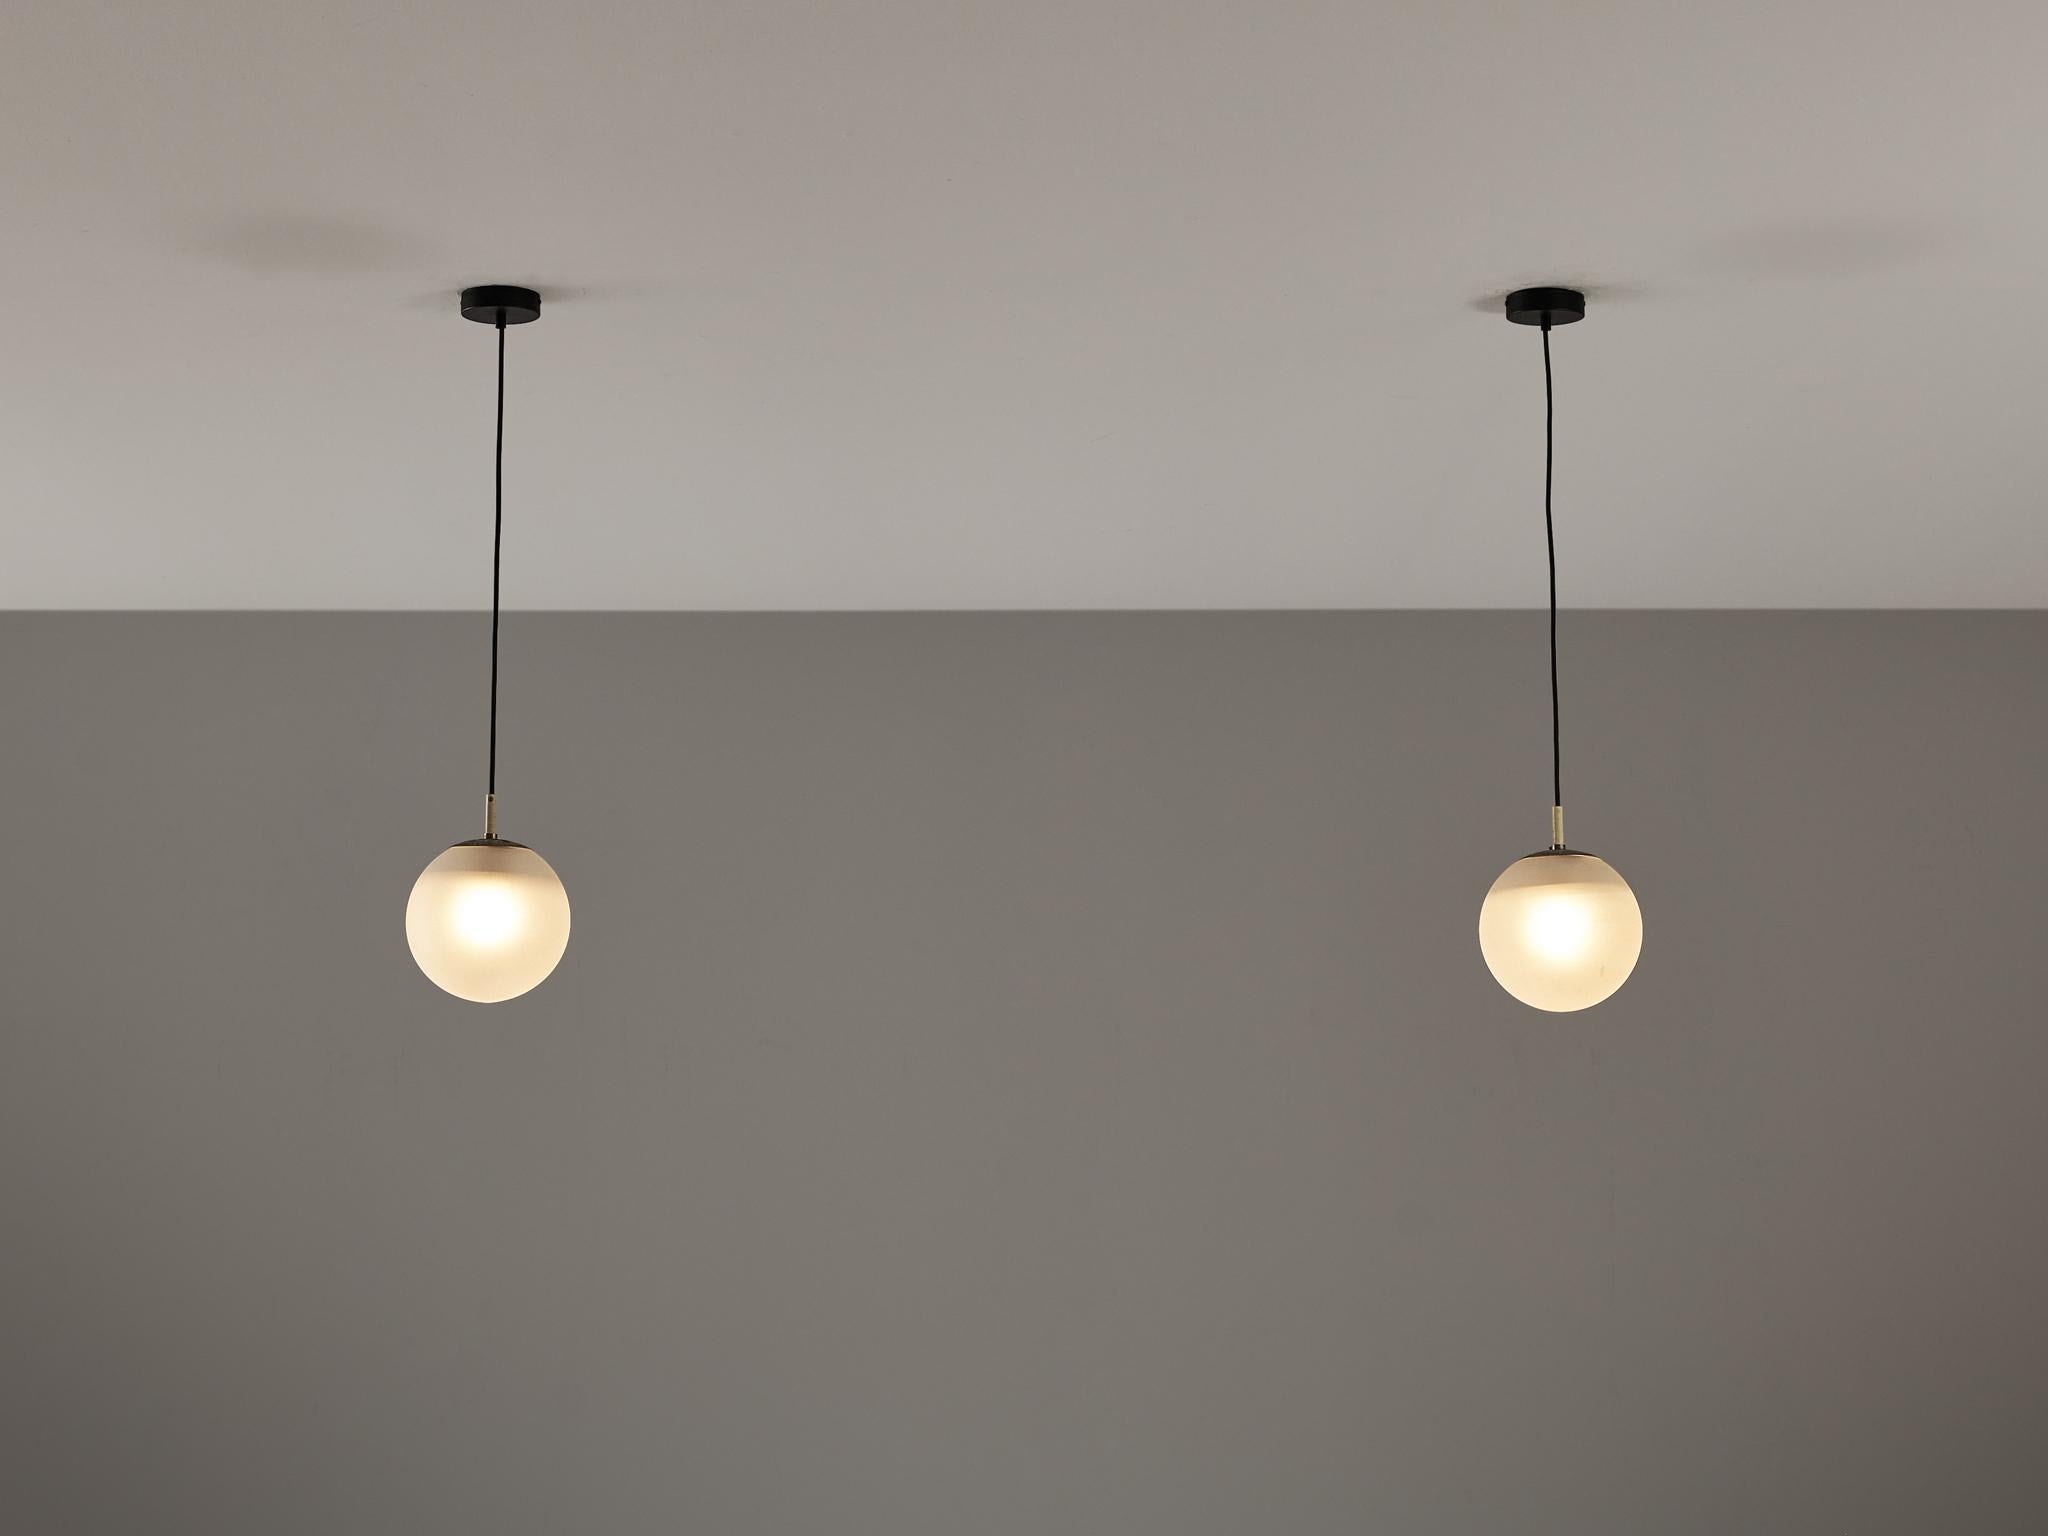 RAAK Amsterdam, pendants, satin glass, metal, Europe, 1970s.

This atmospheric set of pendant lamps features each a frosted glass orb, casting a gentle and soothing light tone that imbues the space with a vibrant atmosphere. The lamps can be hung